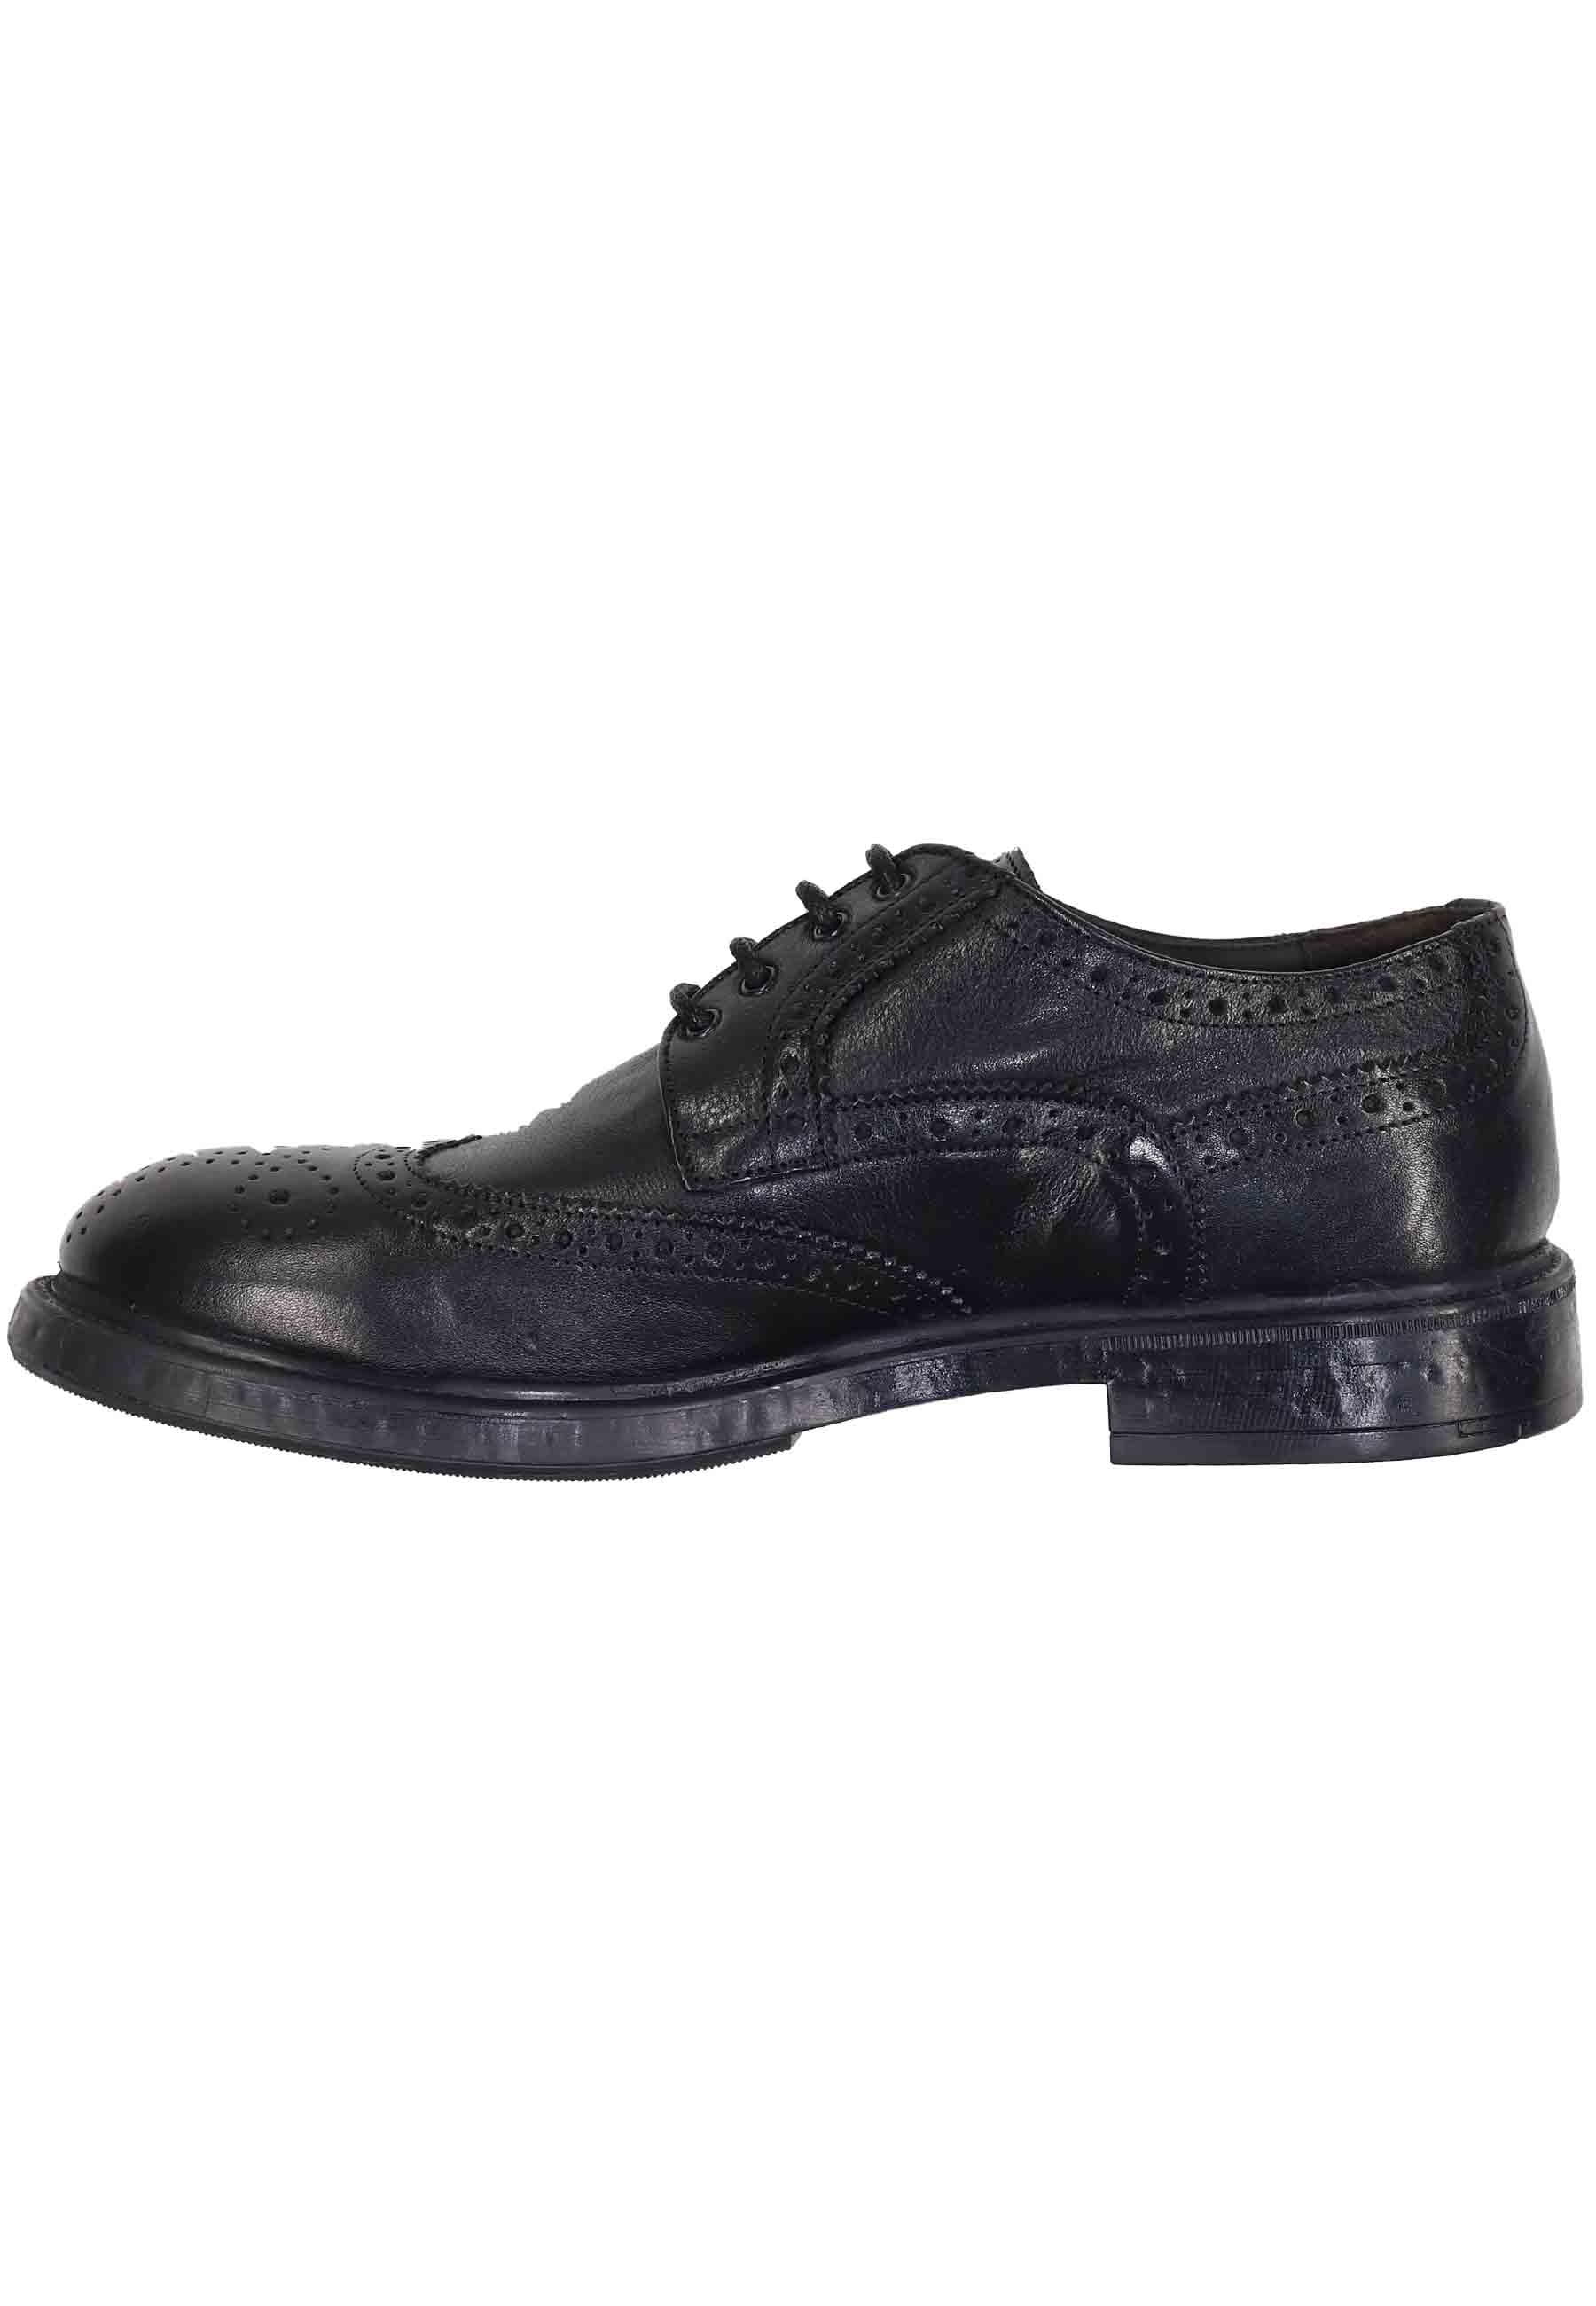 Men's lace-ups in black leather with English stitching and rubber sole